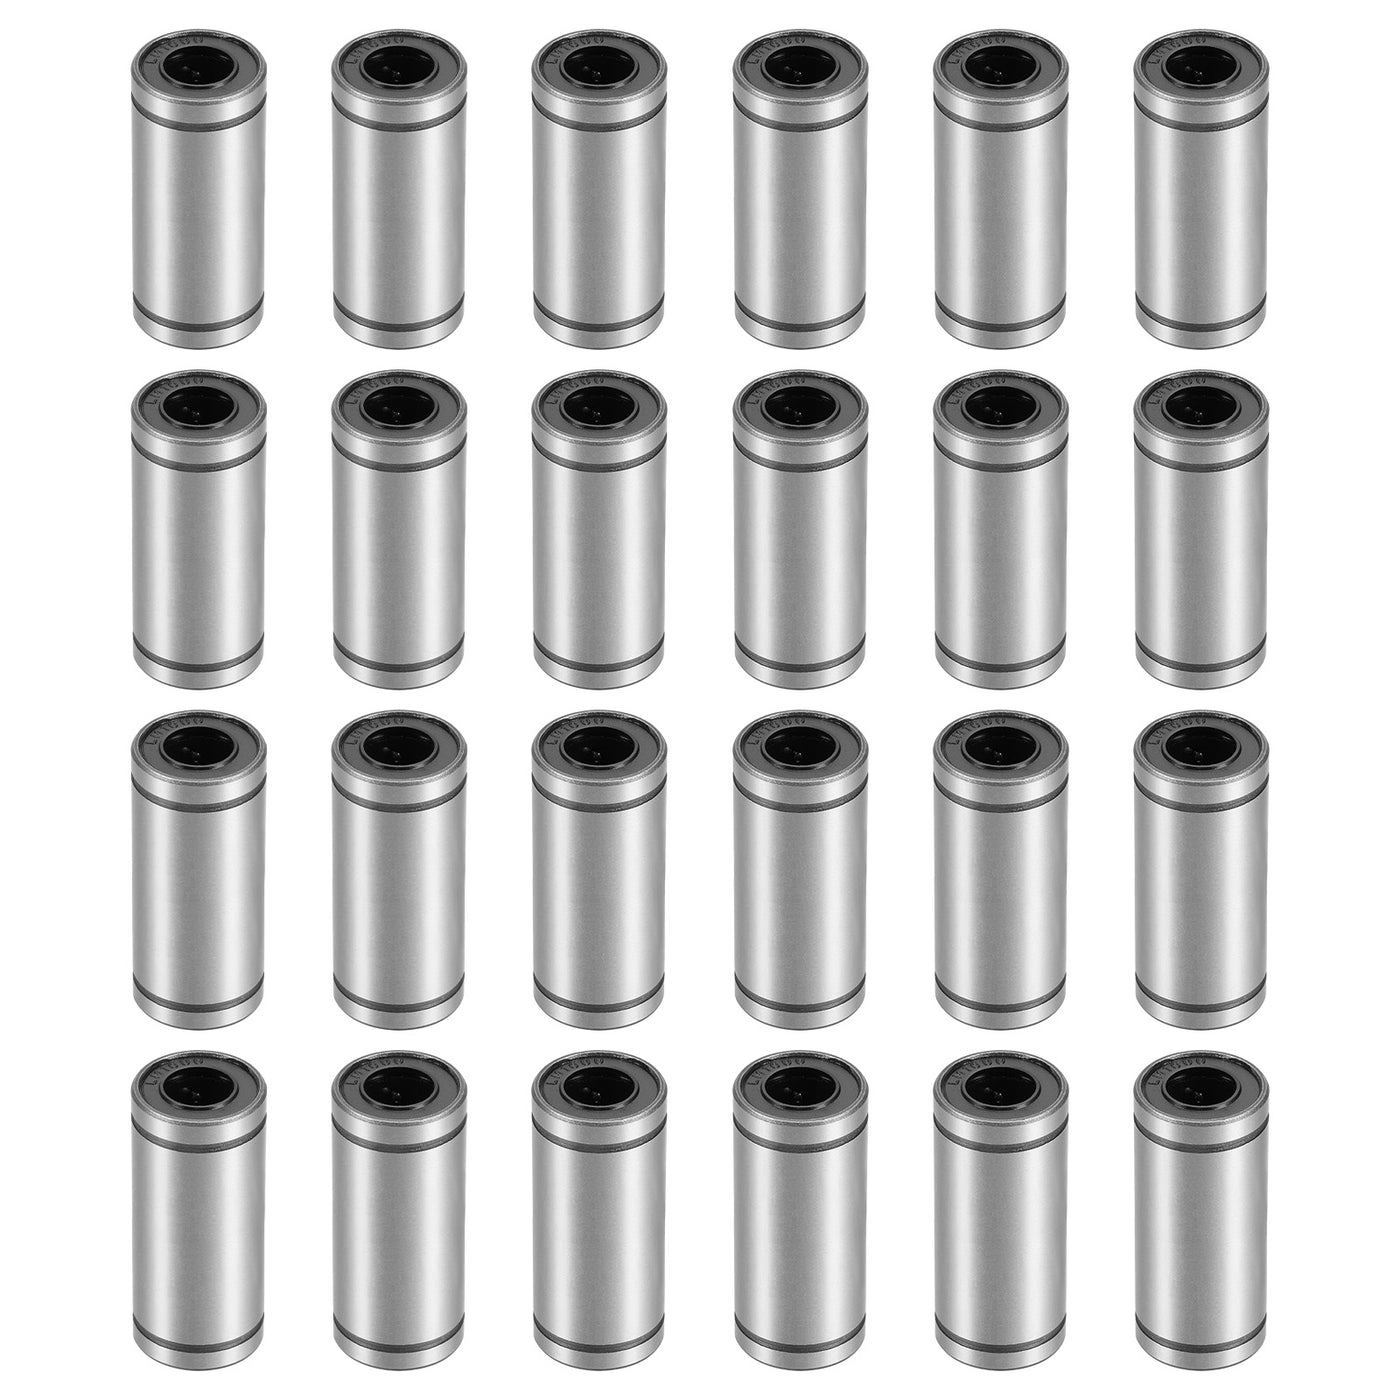 uxcell Uxcell 24pcs LM10LUU Linear Ball Bearings, 10mm Bore 19mm OD 55mm Long Linear Bearing for CNC, 3D Printer